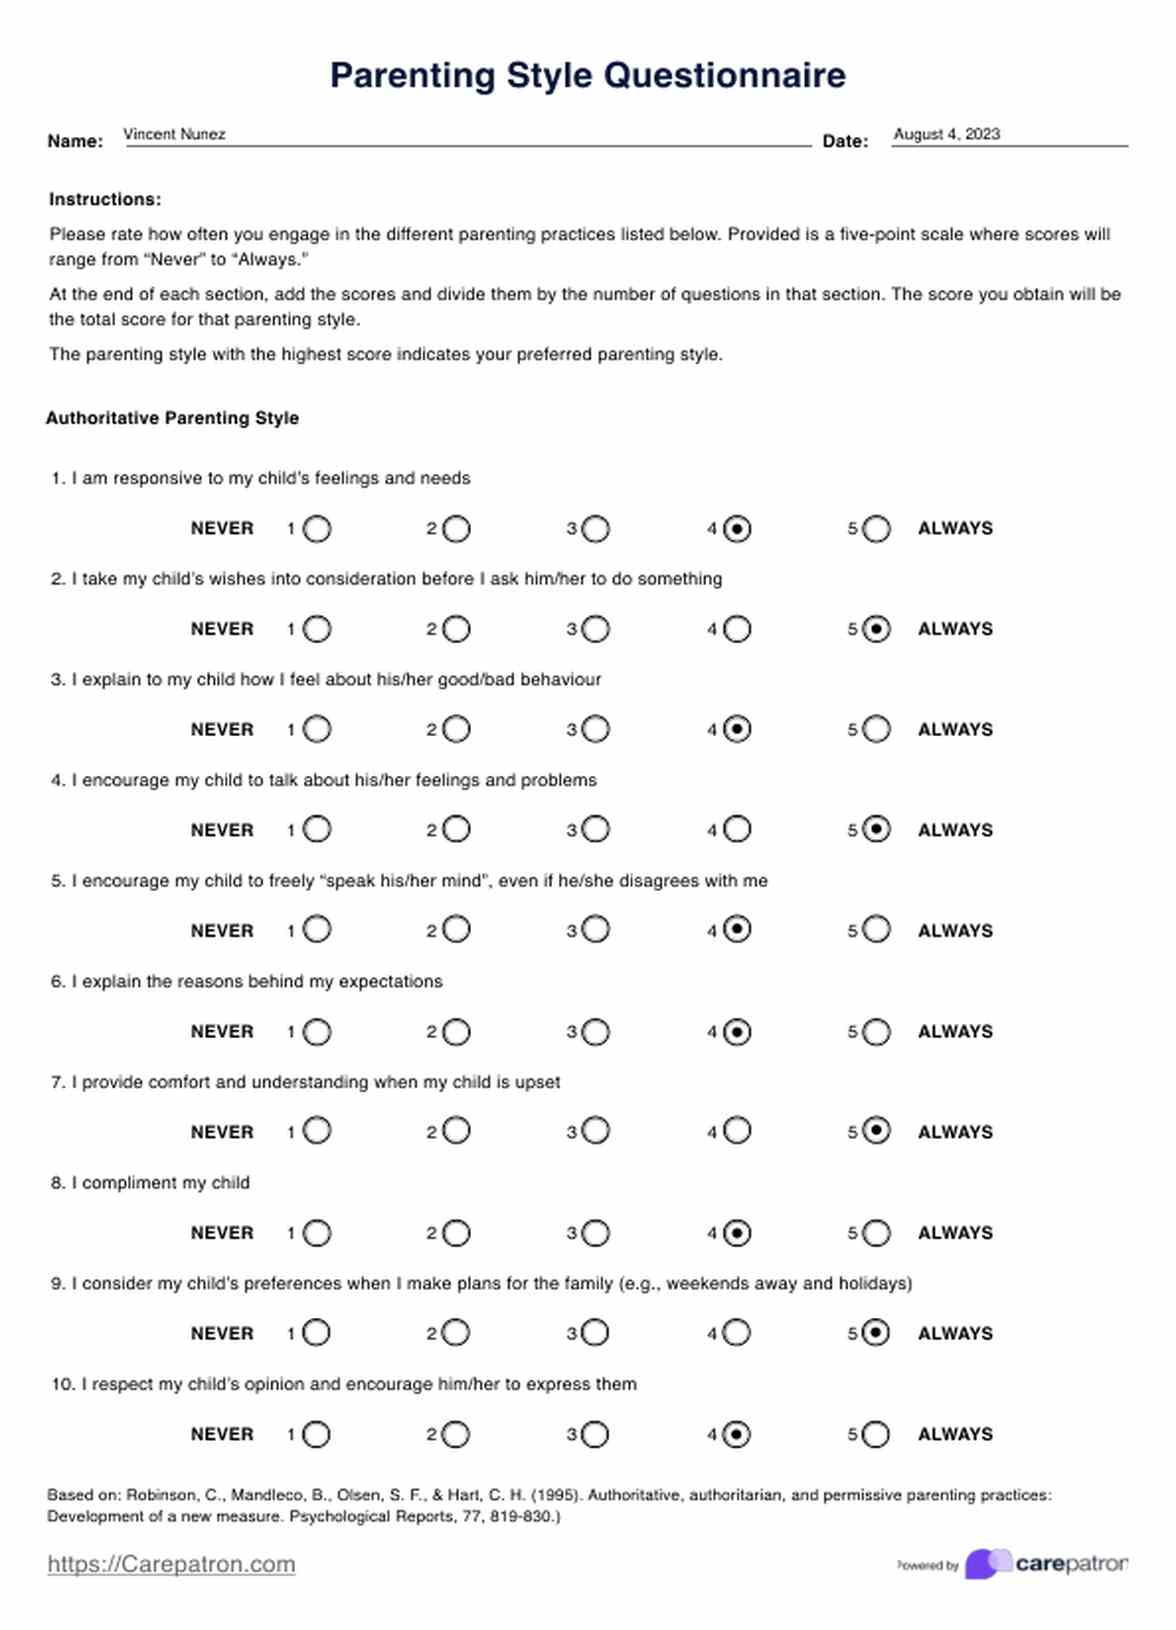 Parenting Styles Questionnaires PDF Example